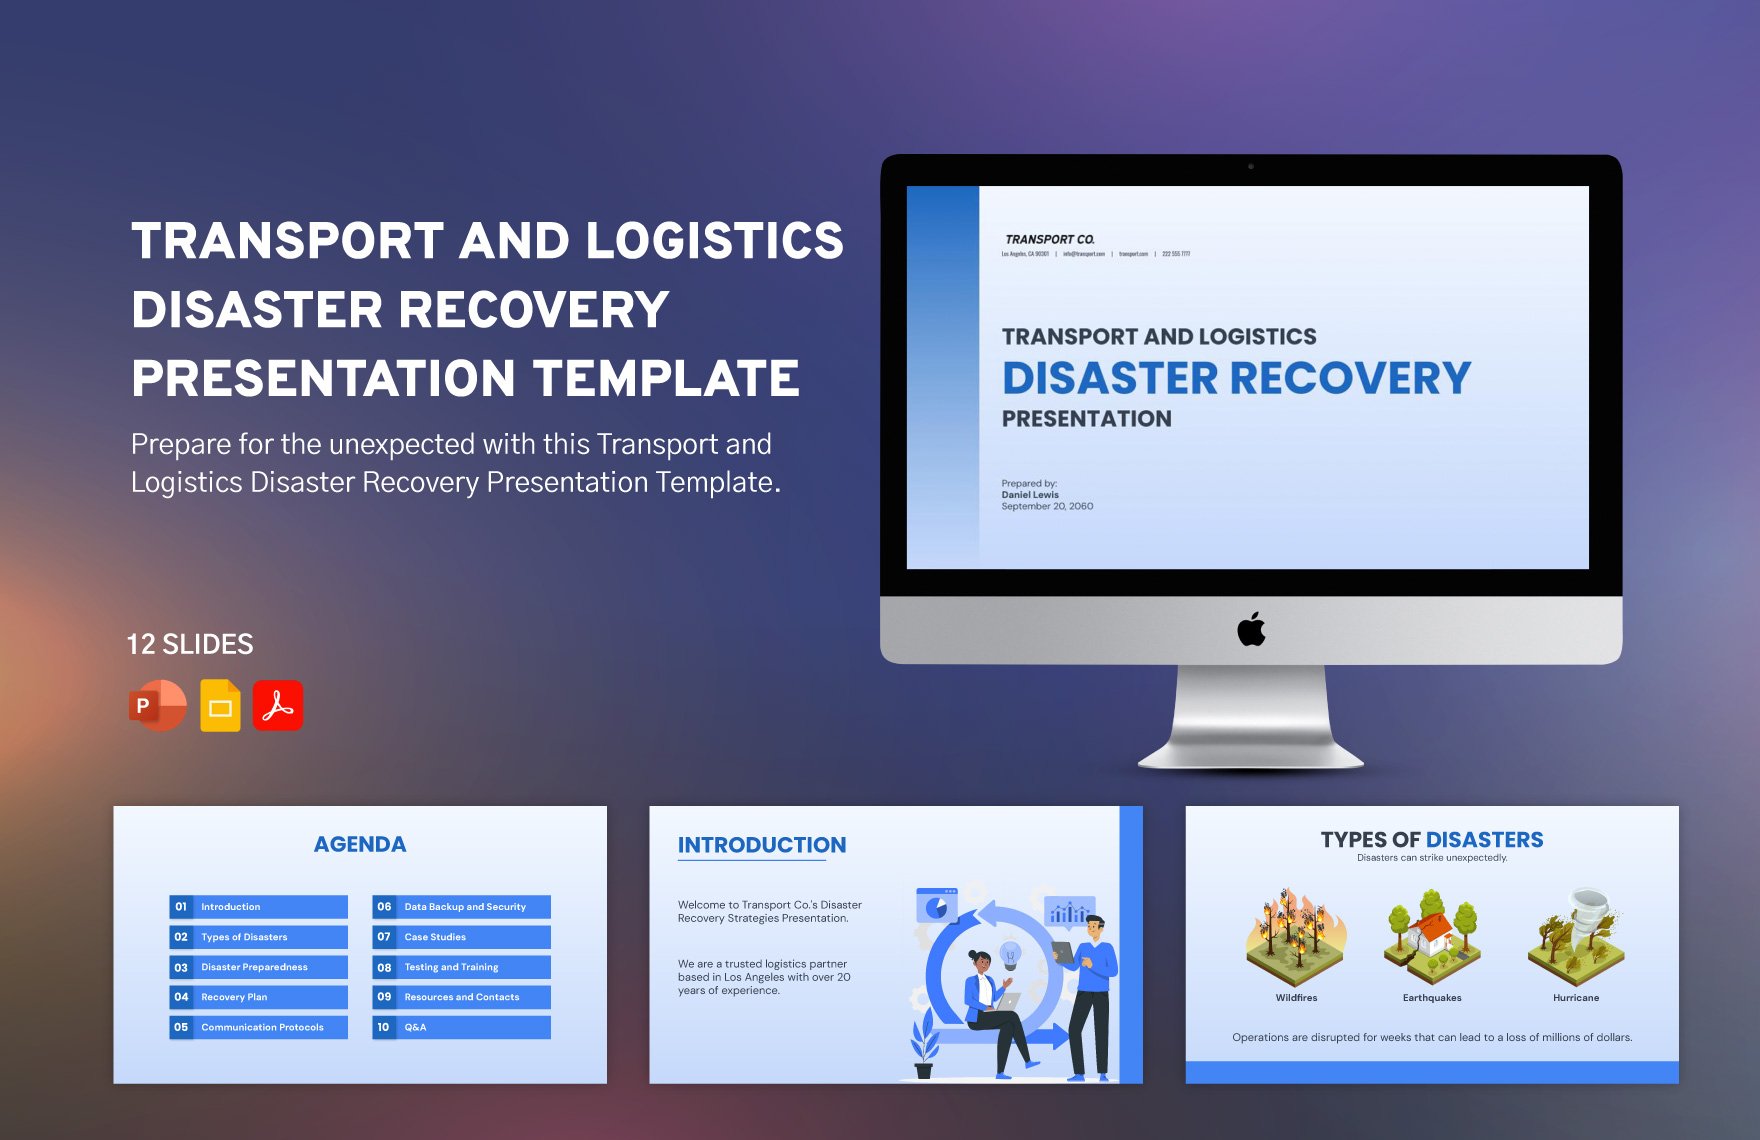 Transport and Logistics Disaster Recovery Presentation Template